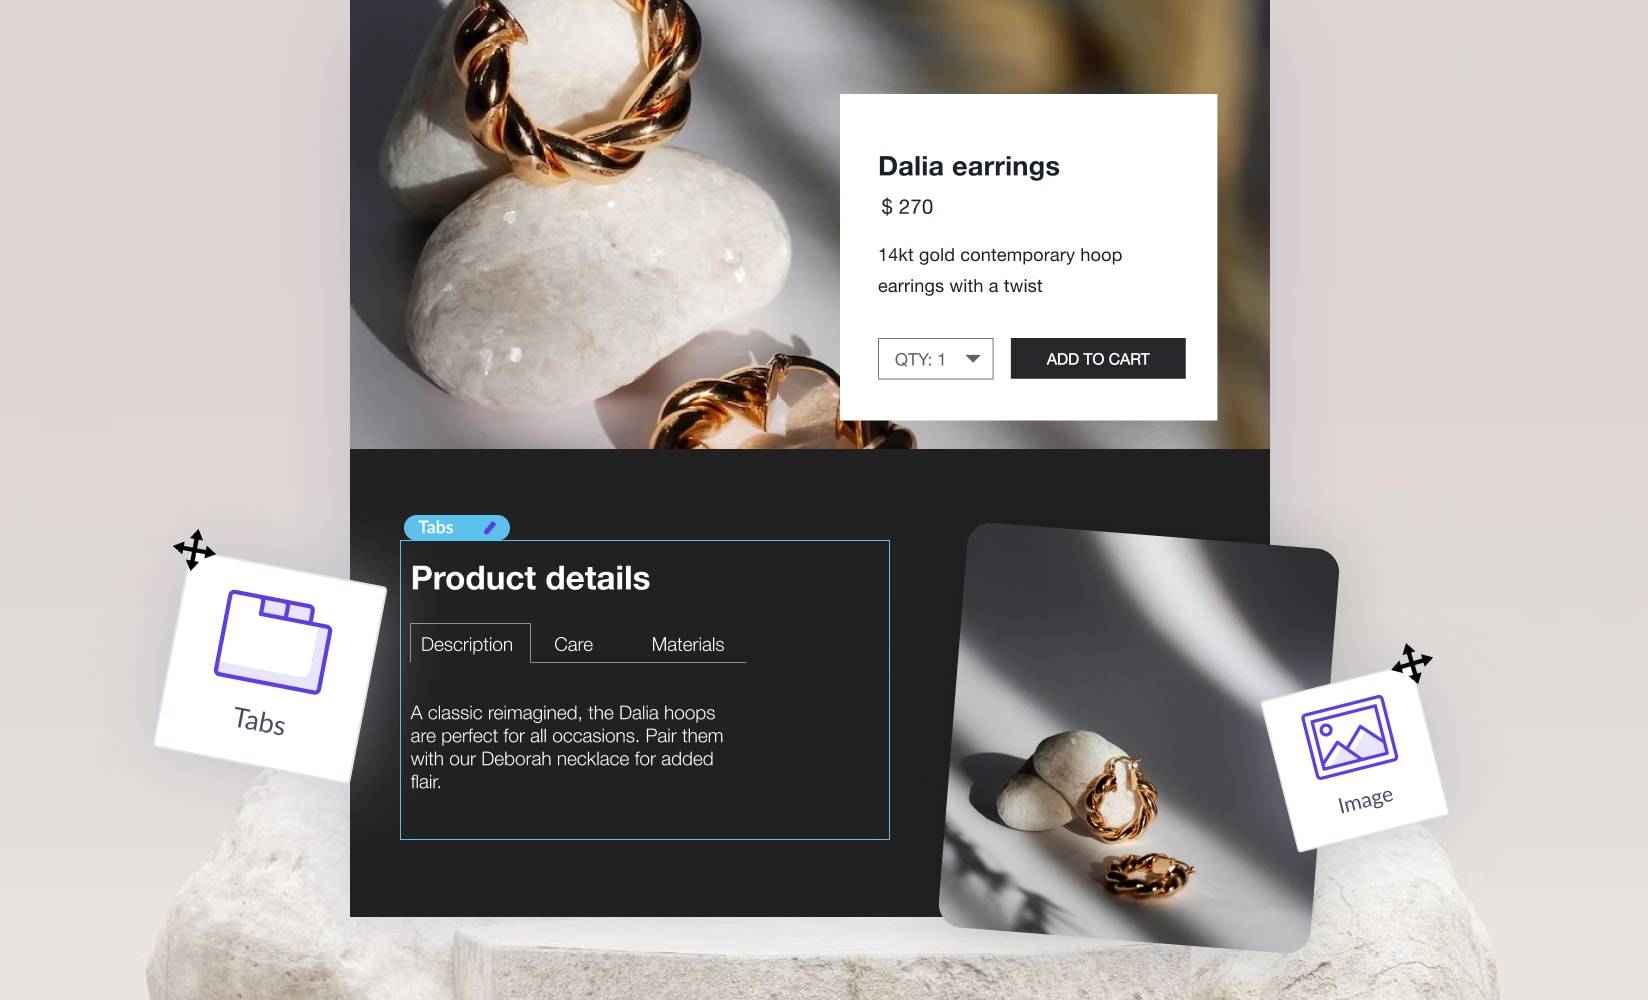 Shopify Page Templates How to Customize Shopify Pages to Grow Your Brand shopify page templates